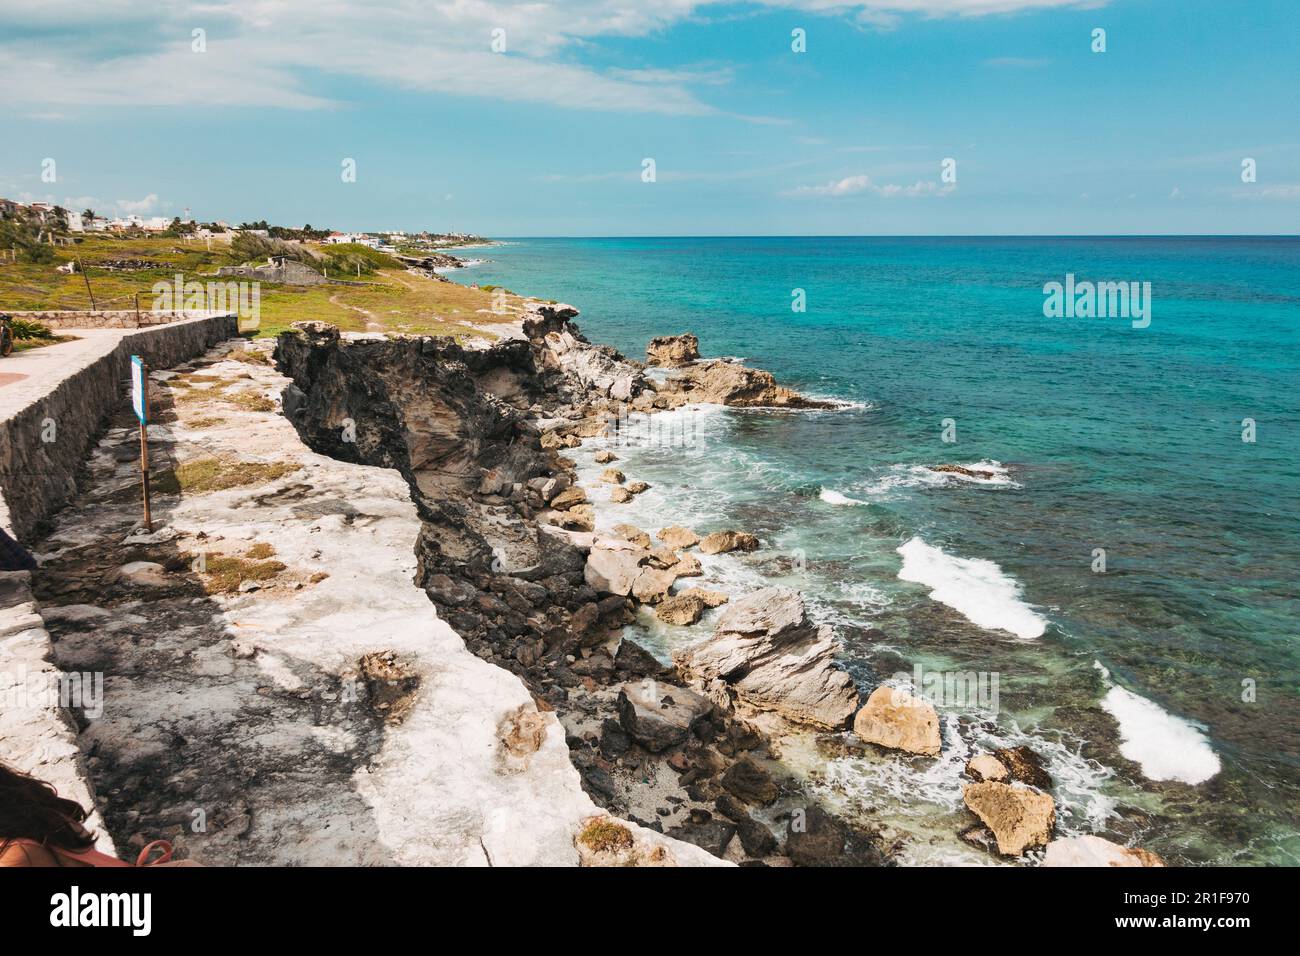 Punta Sur, the southern point of Isla Mujeres, Yucatan, Mexico Stock Photo